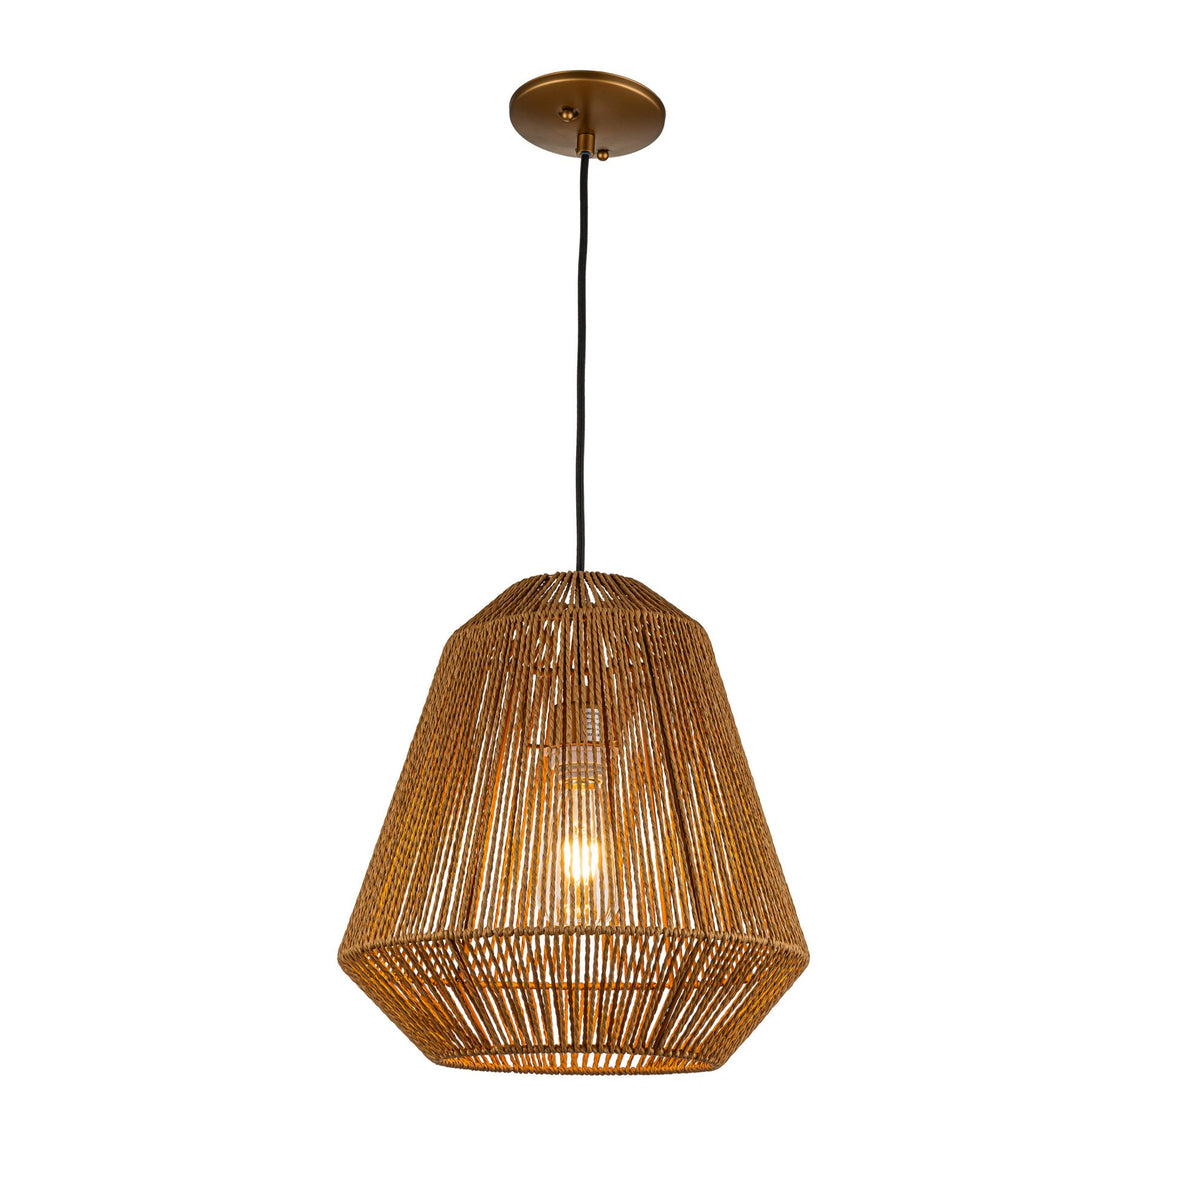 Handcrafted Farmhouse Natural Rattan Pendant Light with Rope Woven Shape